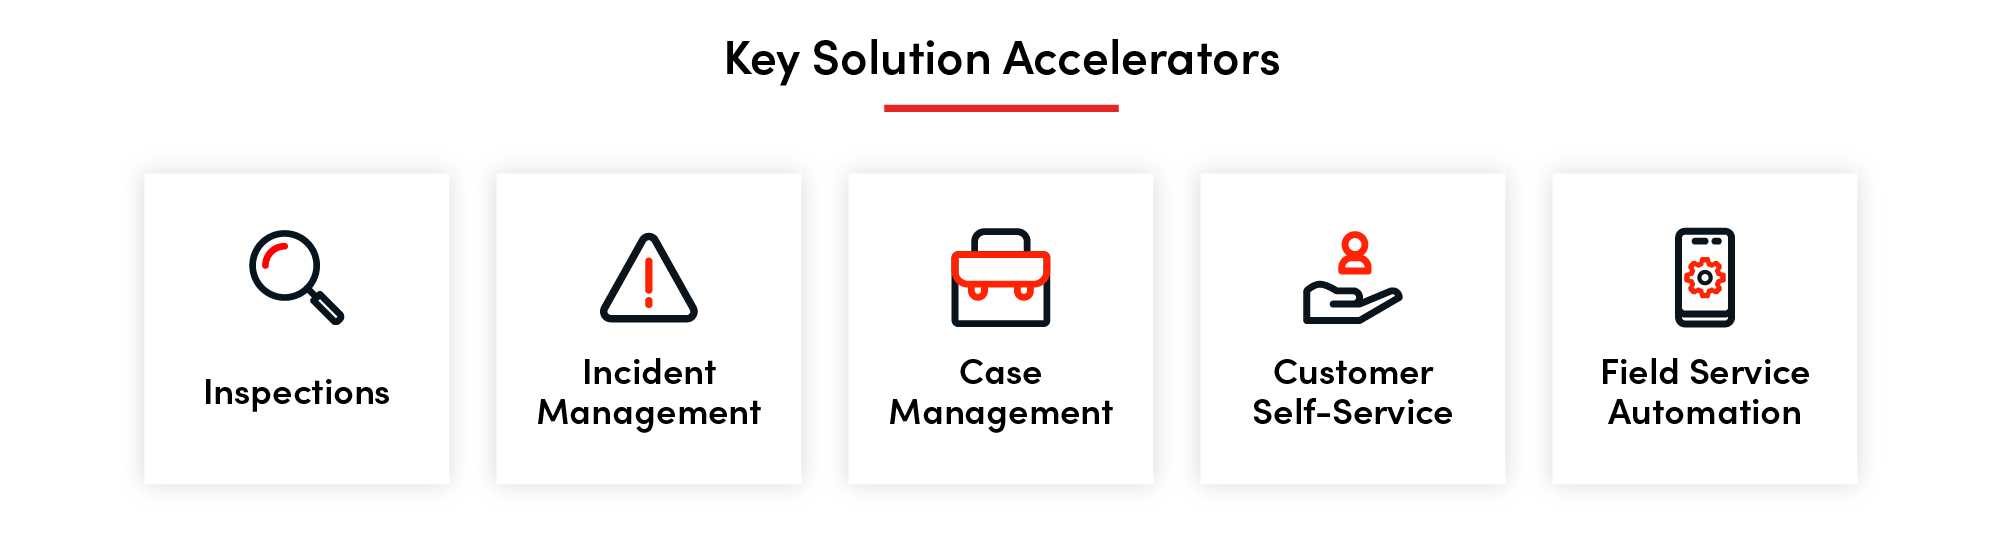 Graphic of key solution accelerators: Inspections, incident management, case management, customer self-service, and field service automation.